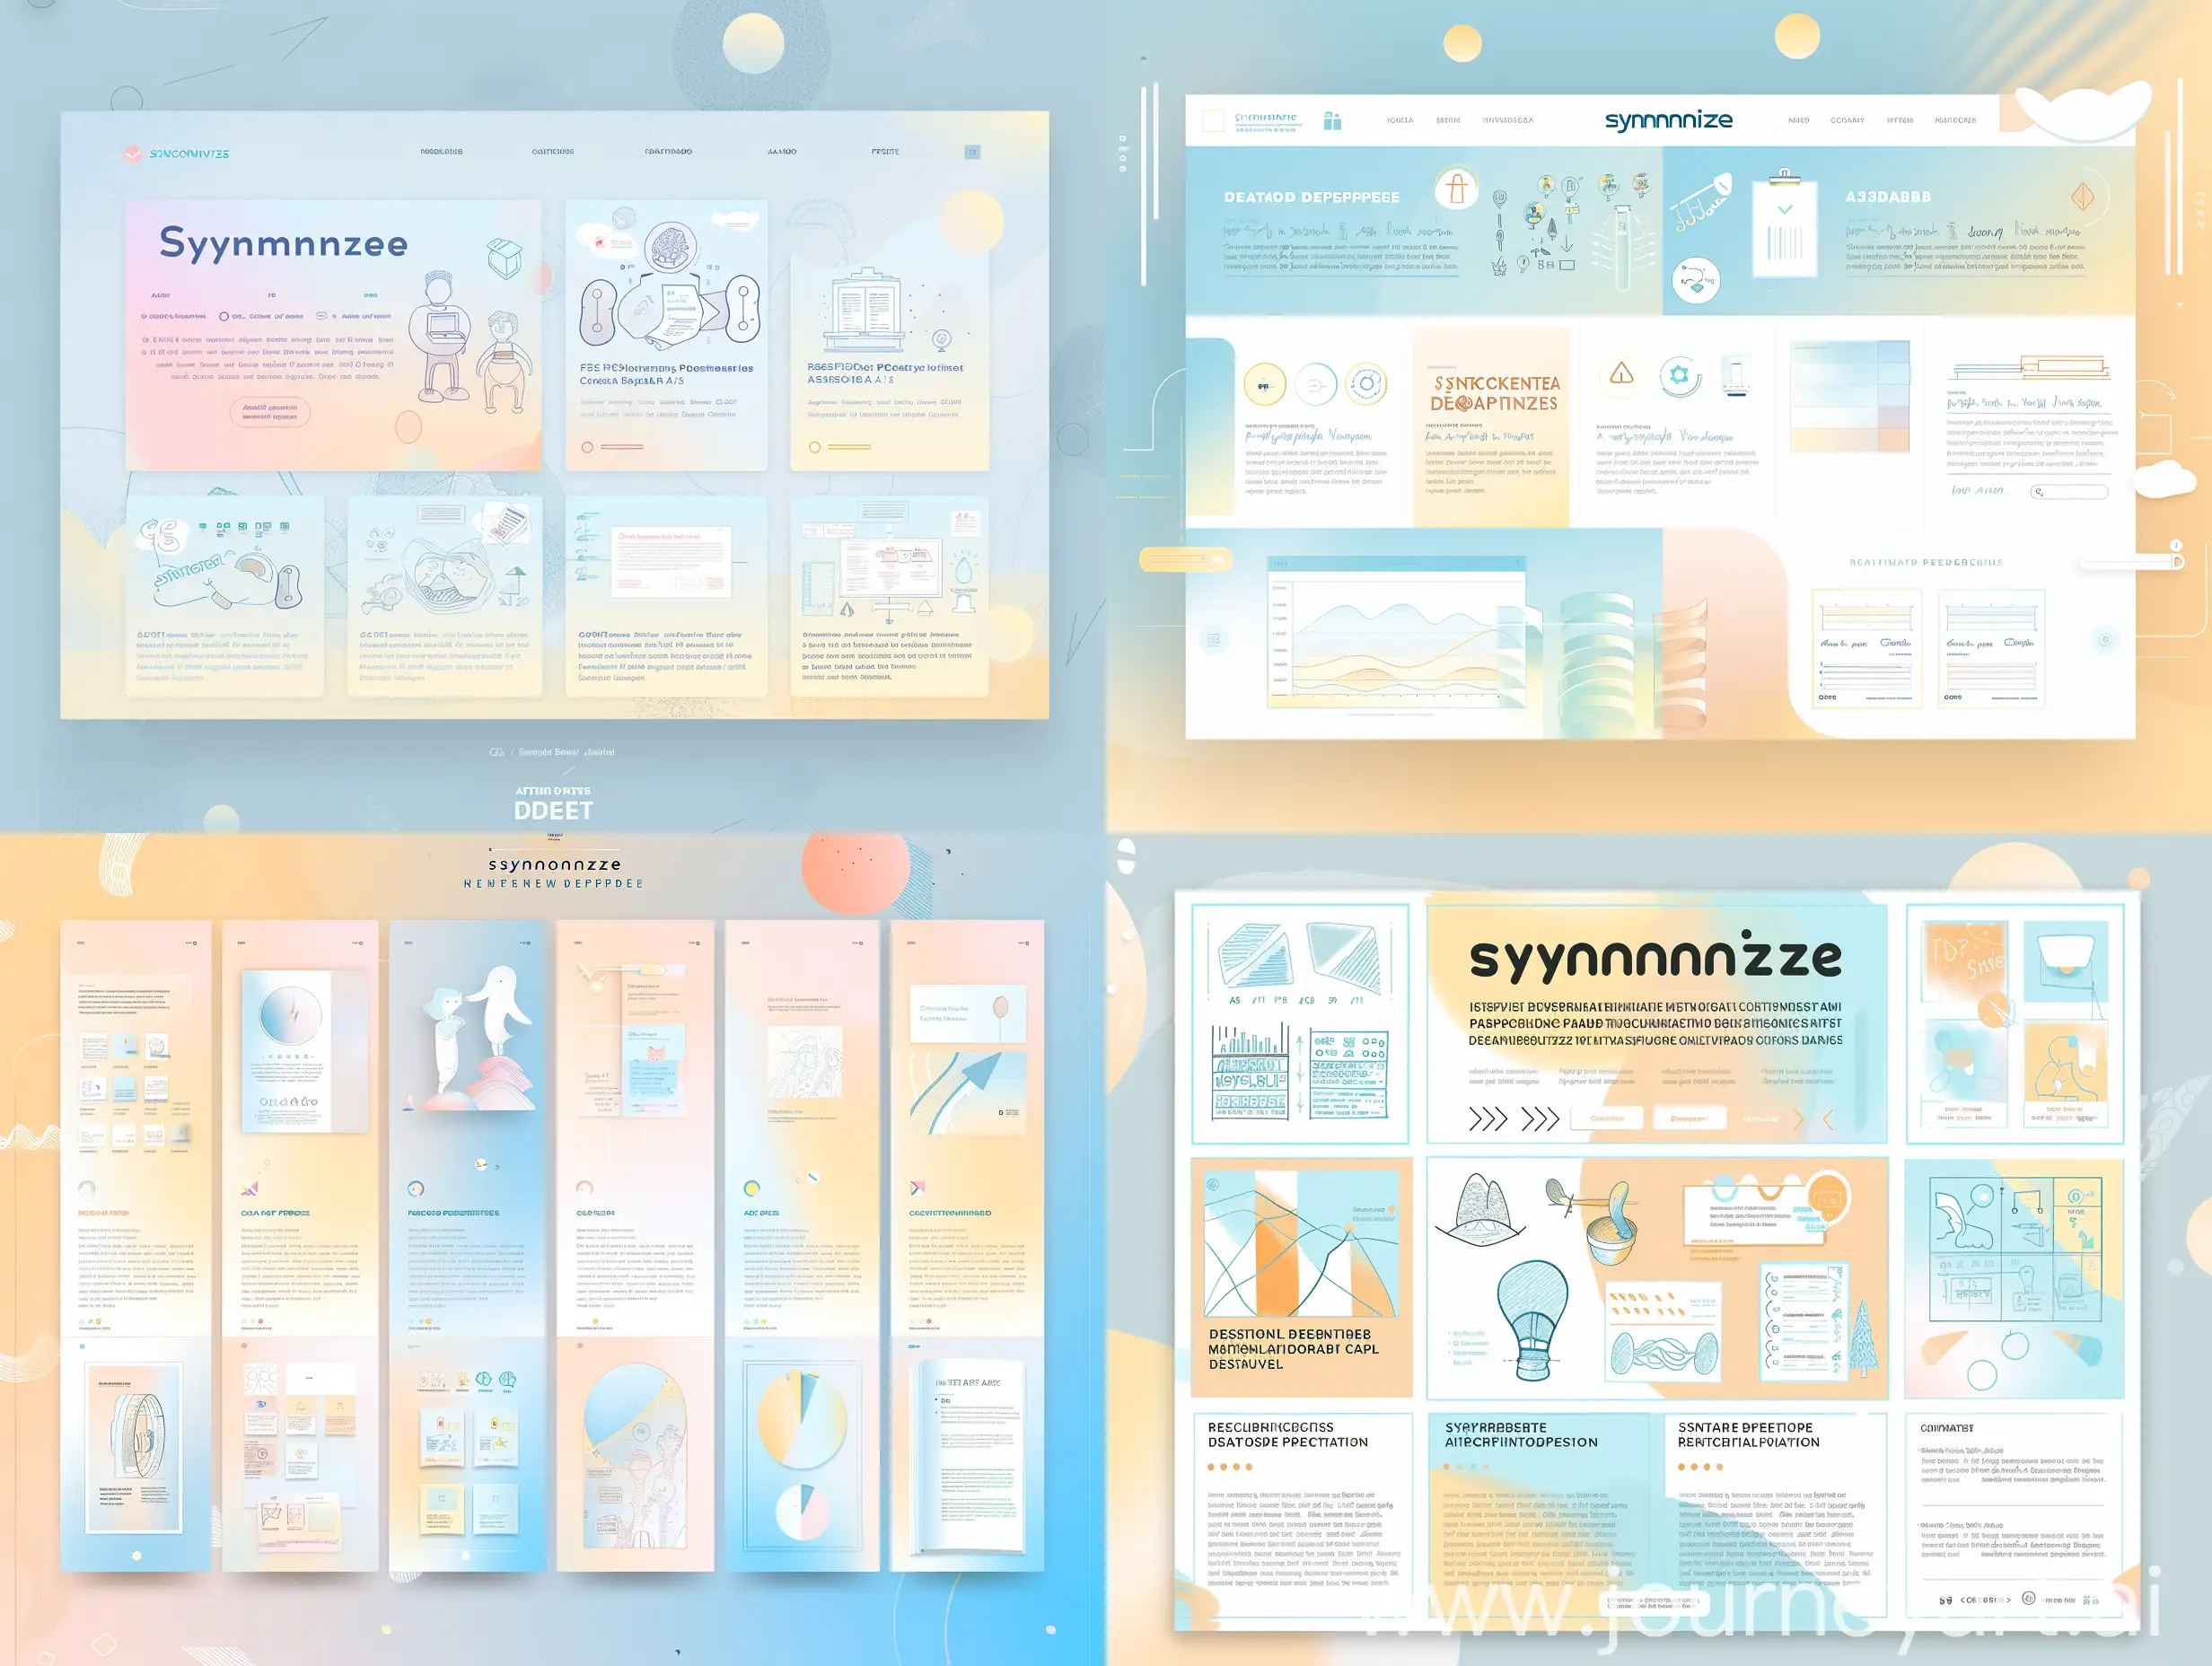 Synkronize-Behance-Post-Template-Pastel-Blue-and-Yellow-Gradient-Design